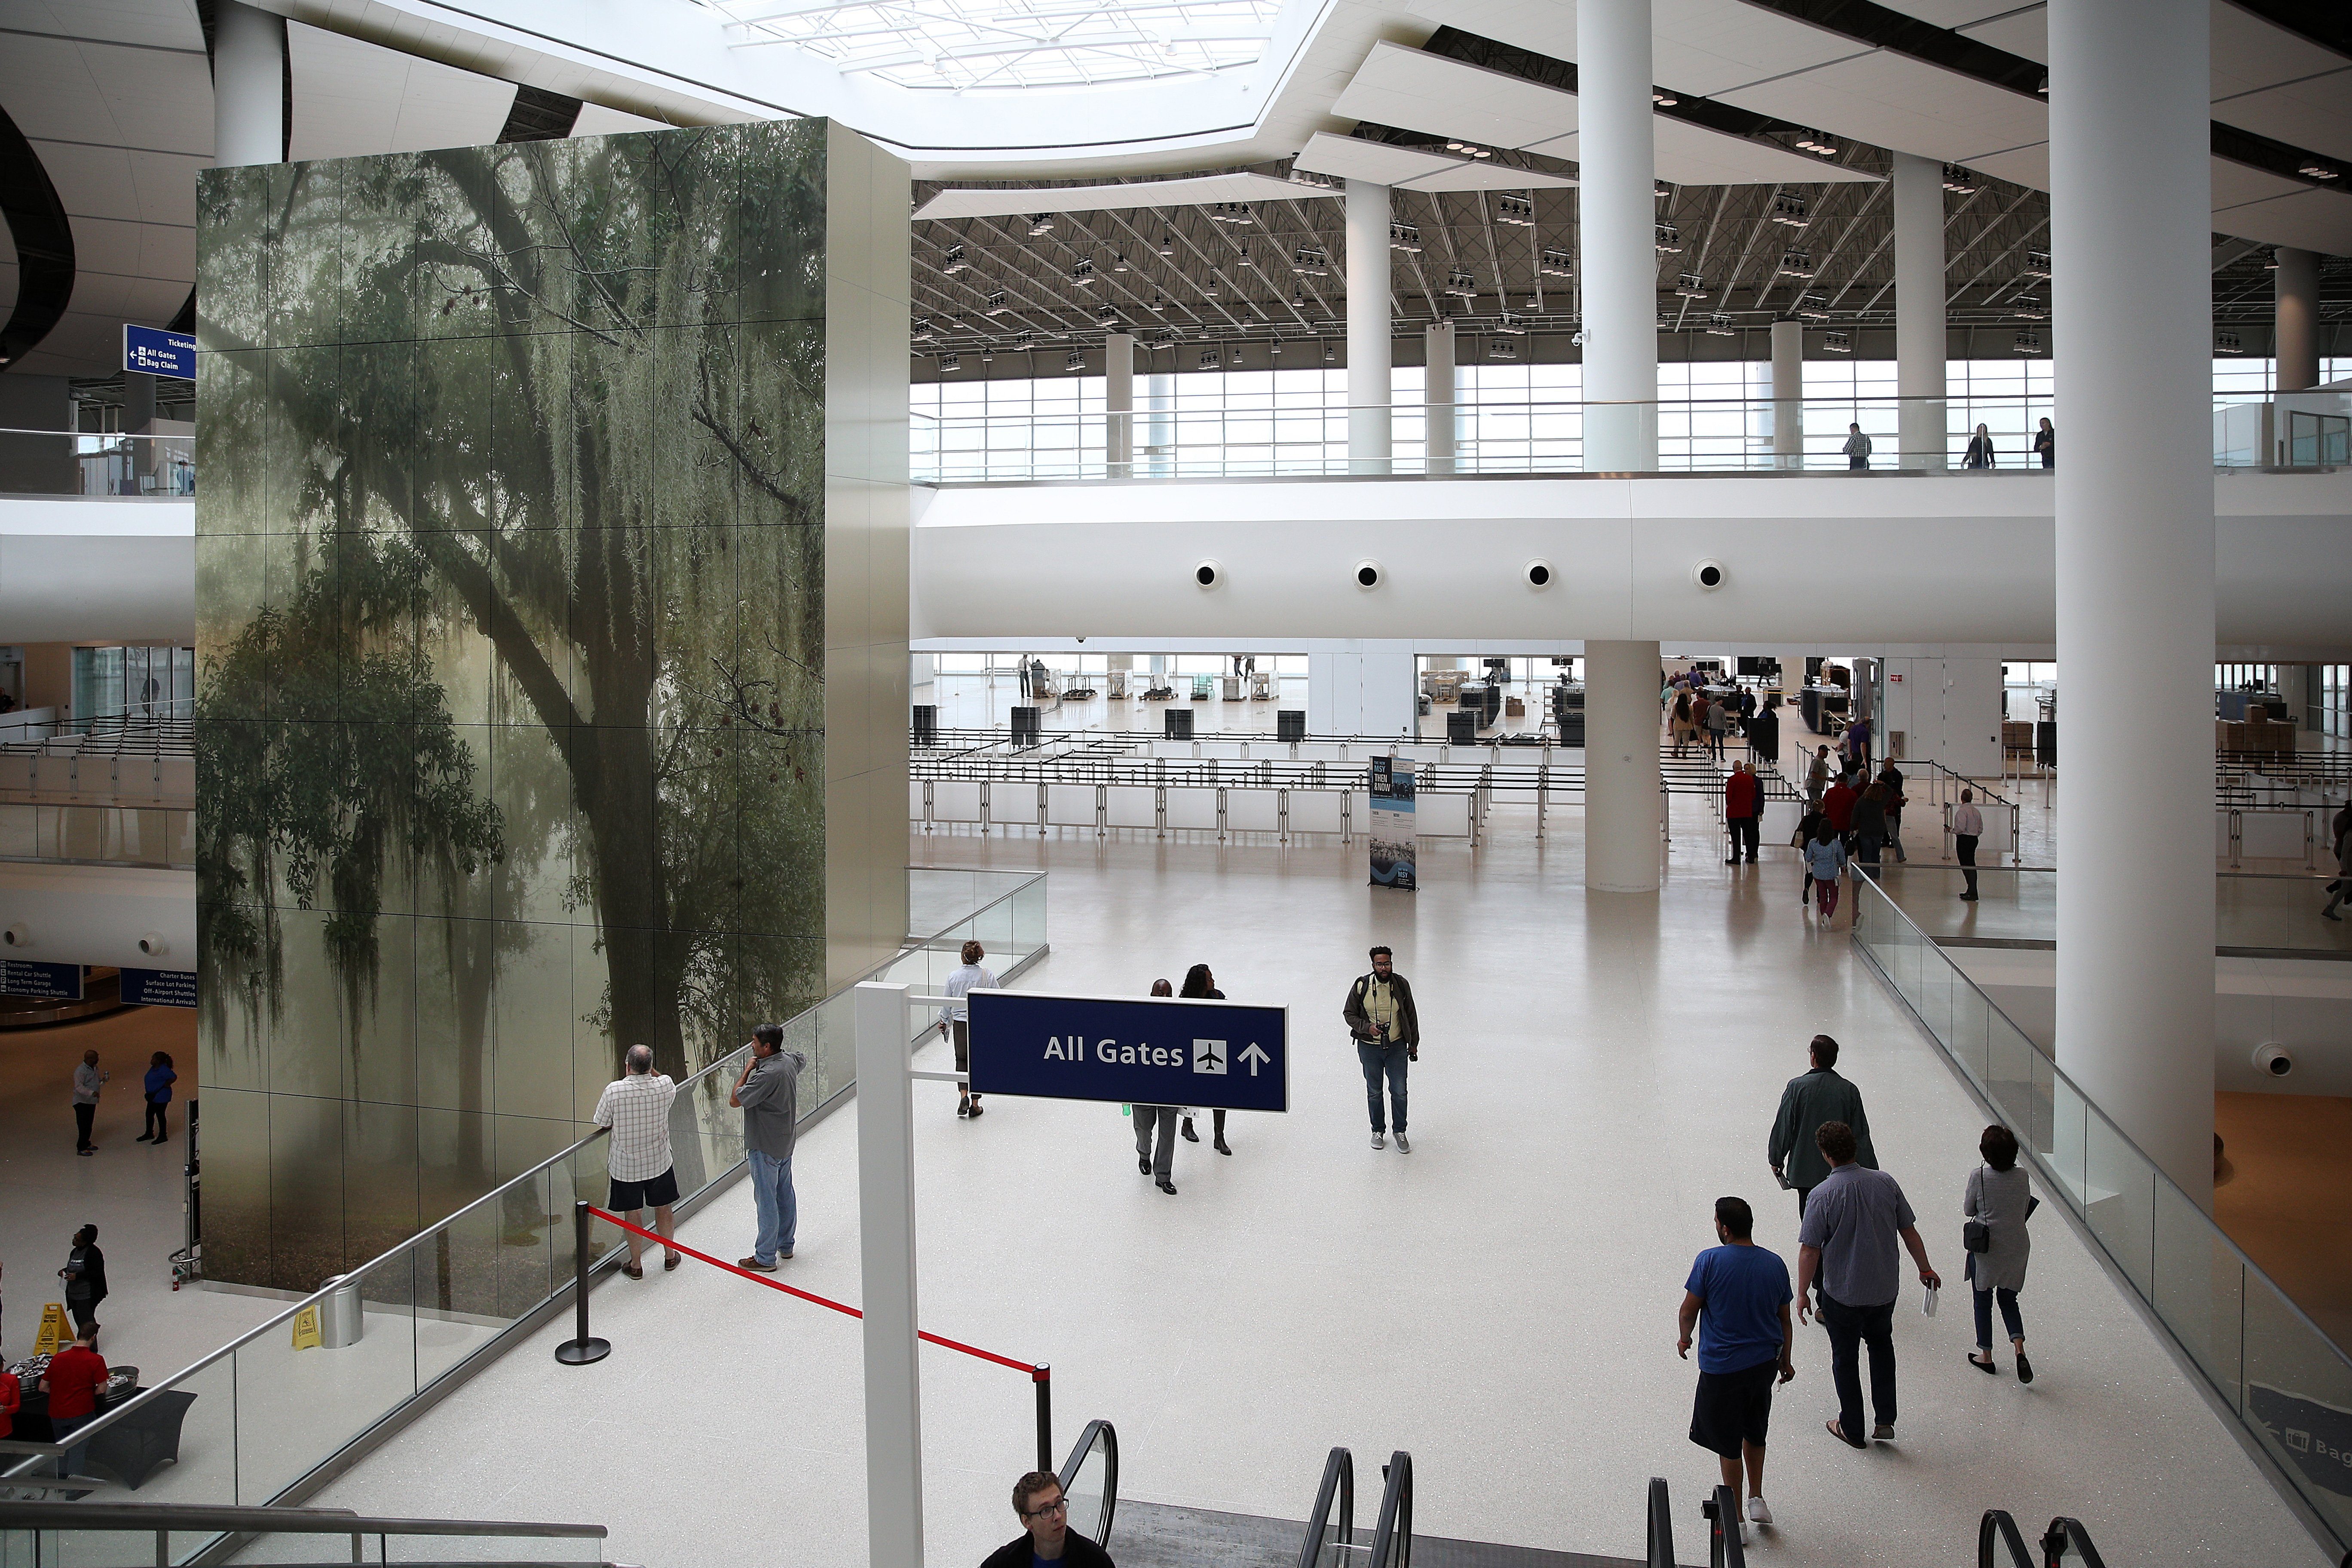 A general view of the interior of the new airport at Louis Armstrong New Orleans International Airport on October 24, 2019 in Kenner, Louisiana.